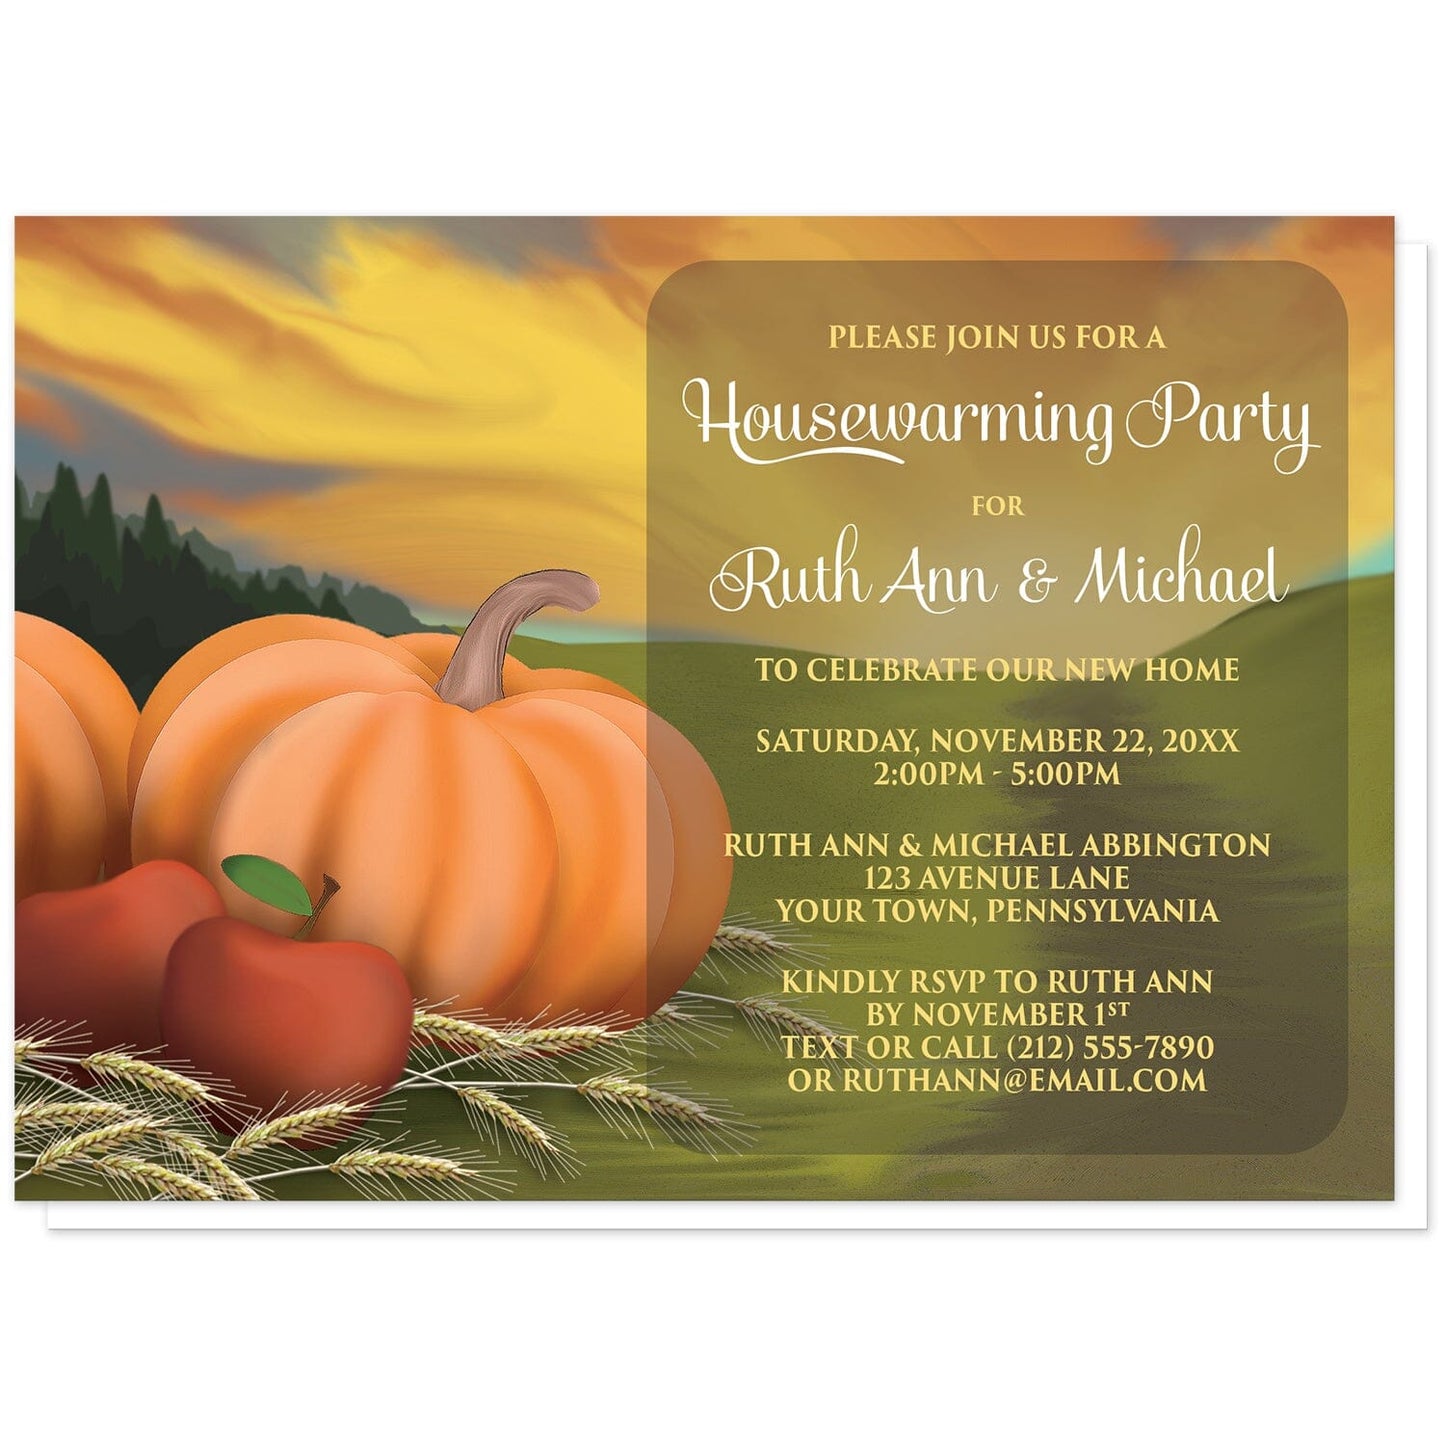 Country Autumn Harvest Housewarming Invitations at Artistically Invited. Country autumn harvest housewarming invitations designed with pumpkins, apples, and hay stems in a country farm or open fields illustration. Your personalized housewarming details are custom printed in white and yellow over a darker area over the scene to the right of the harvest.